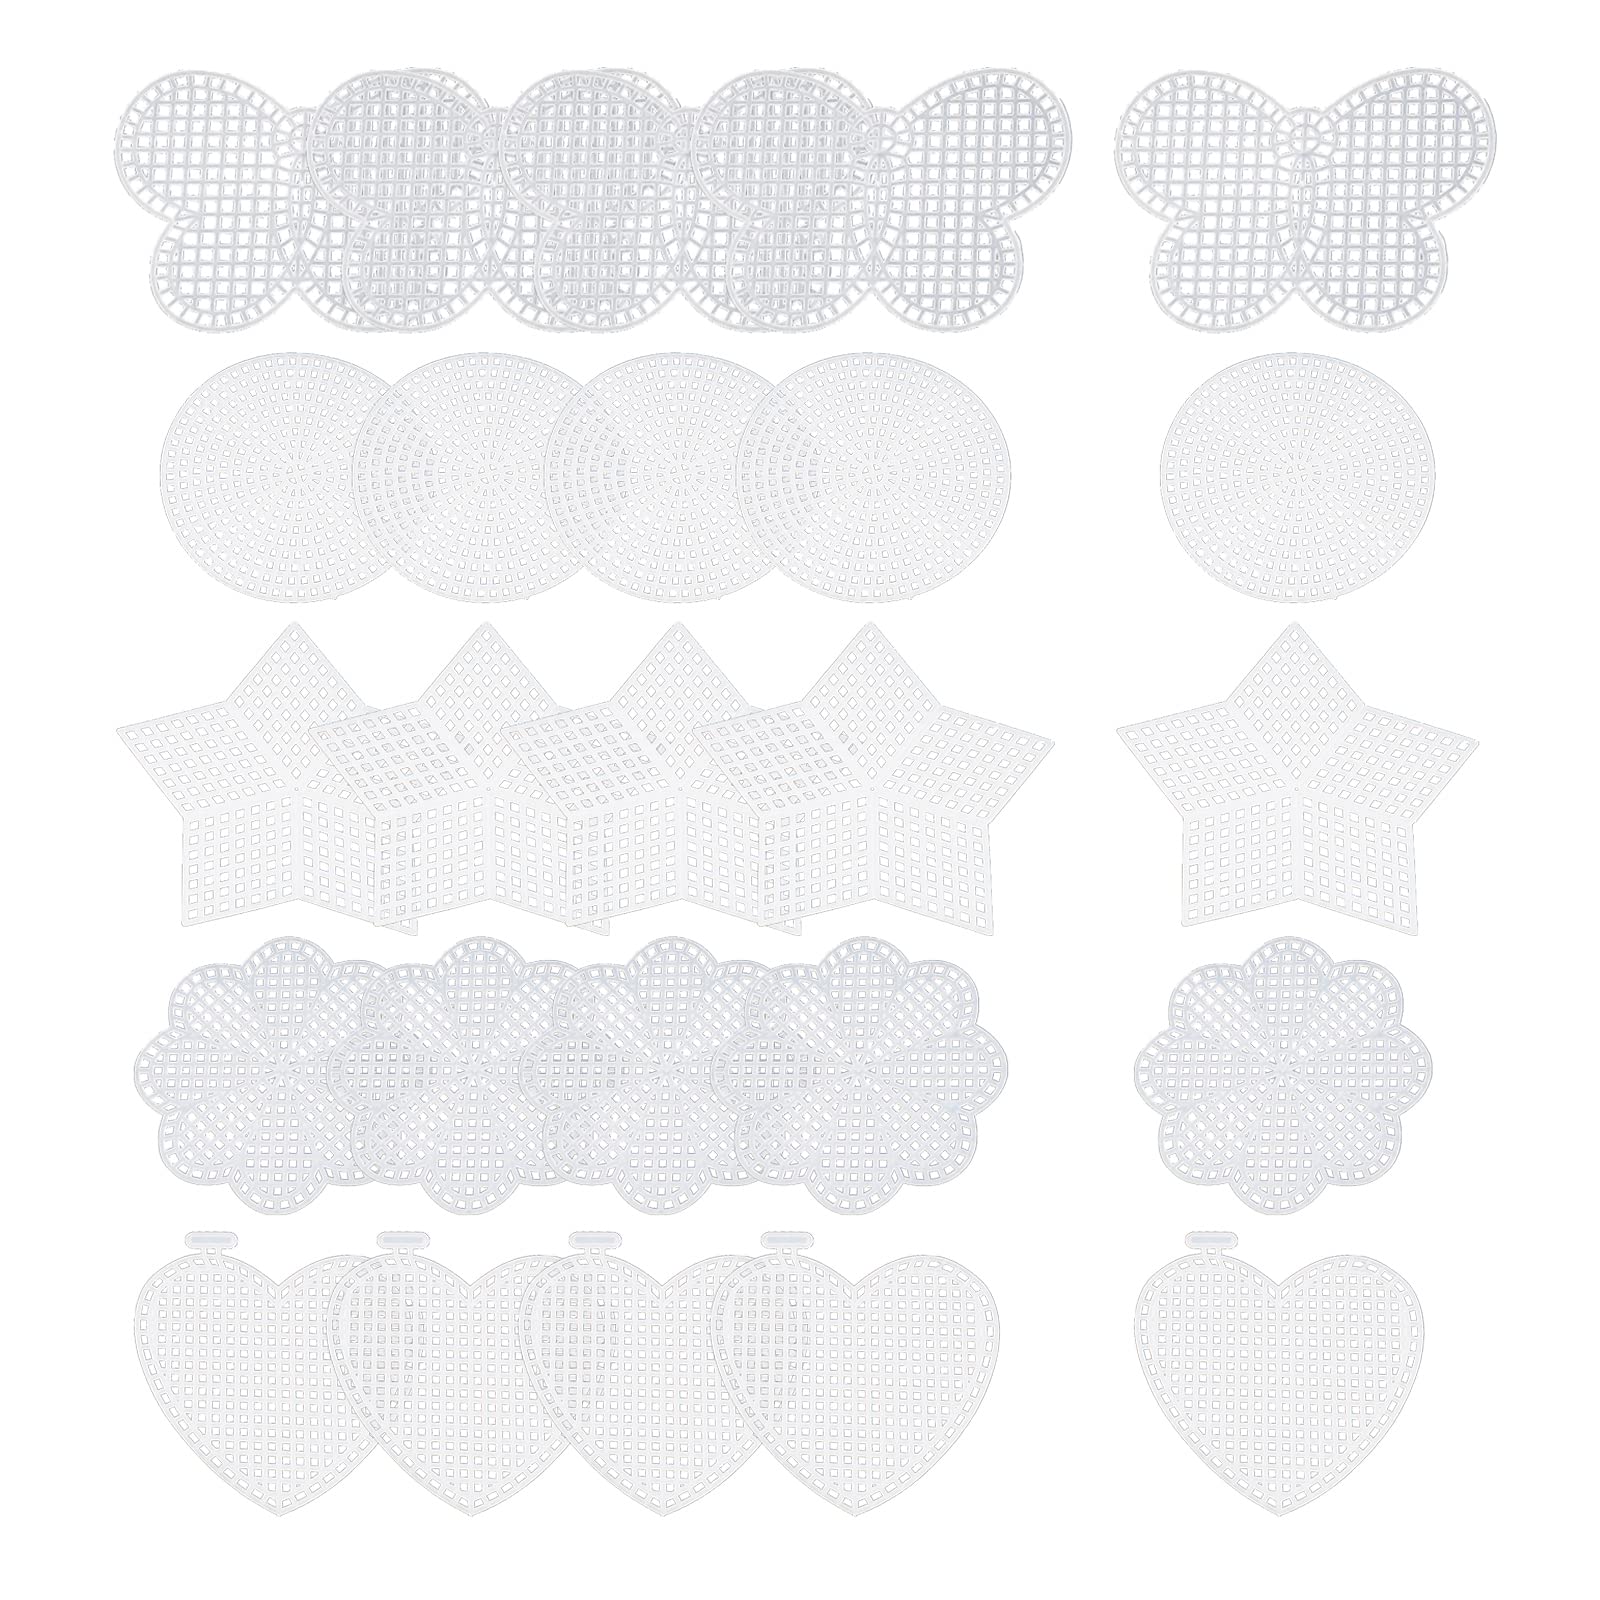 MY MIRONEY Mesh Plastic Canvas Kits 25 Pieces 5 Shapes Blank Mesh